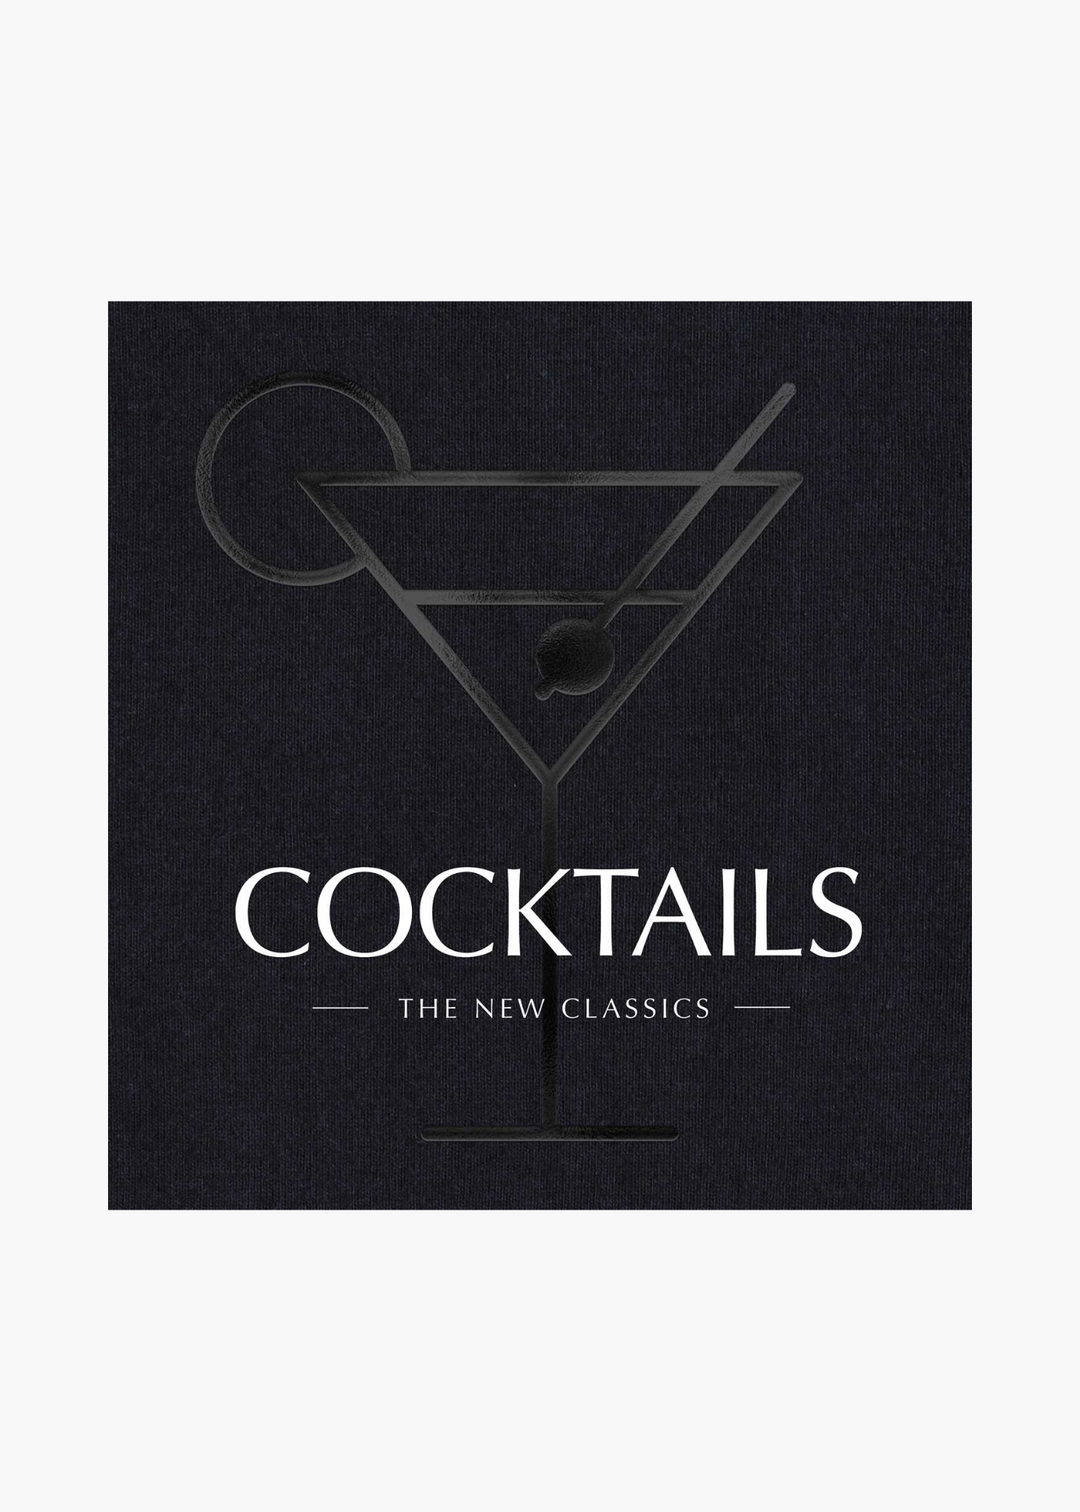 COCKTAILS: The New Classics